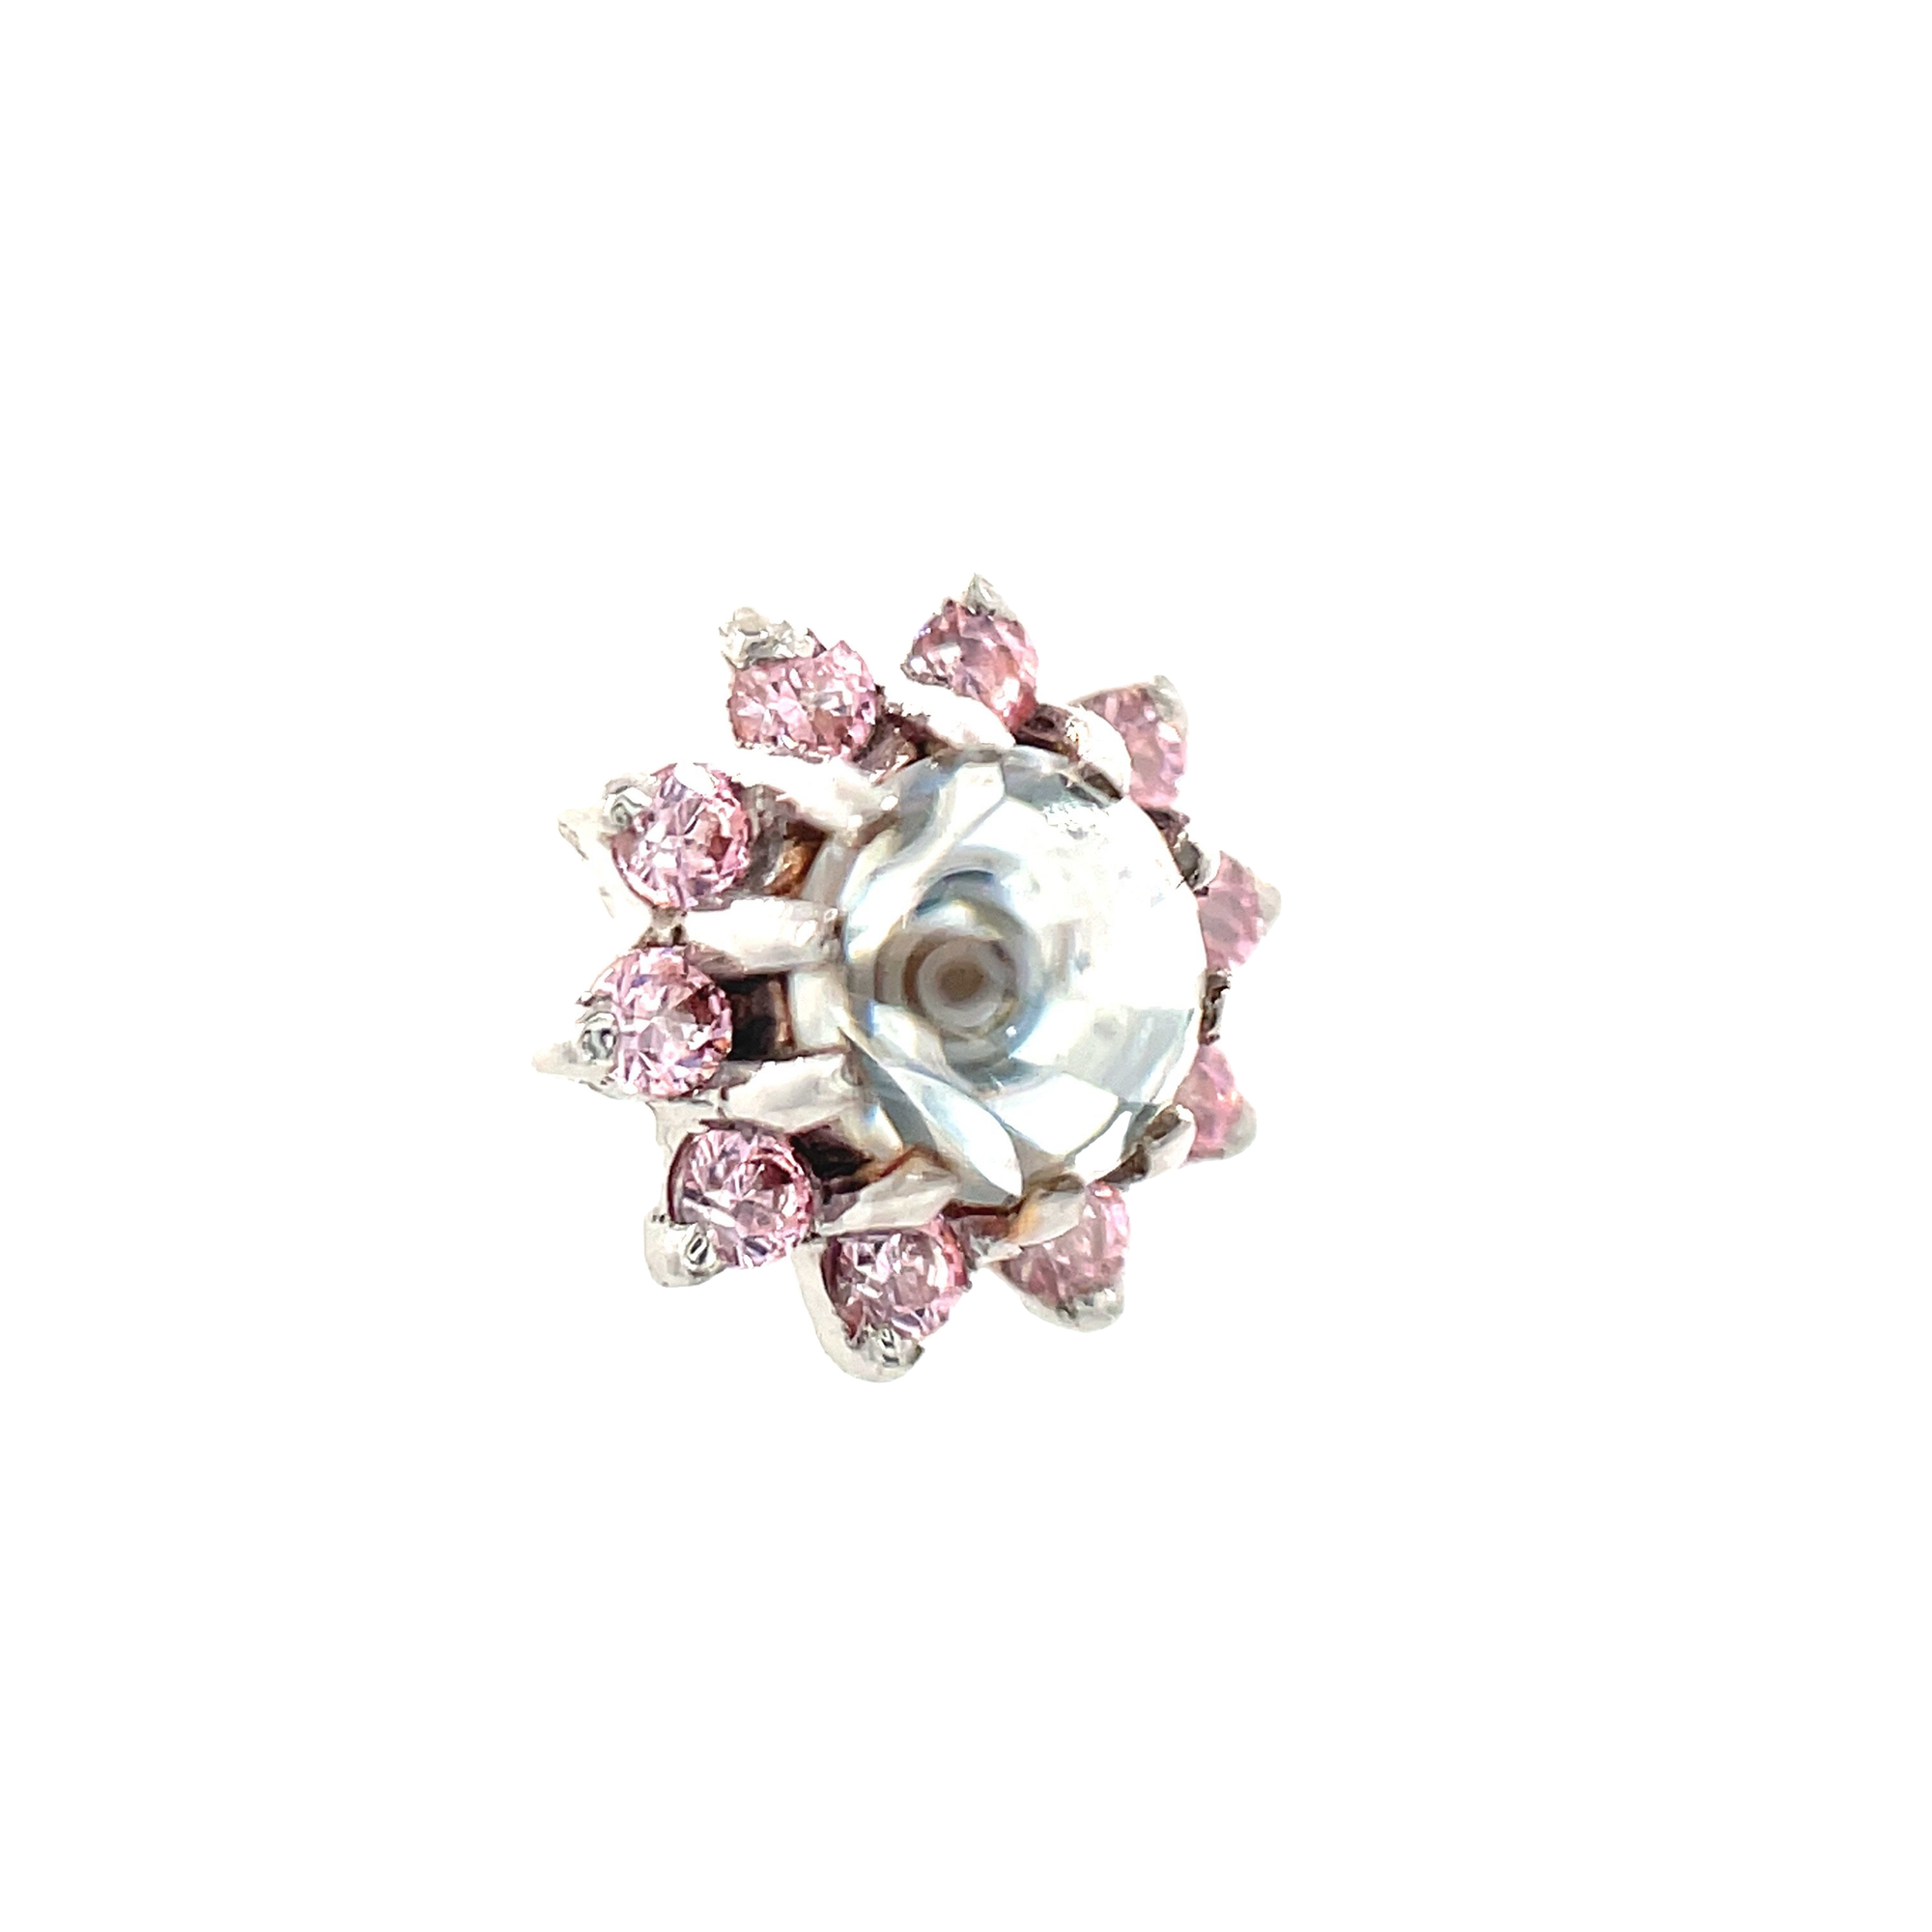 Auris 14ct White Gold Astra Small Pink & White CZ End - Isha Body Jewellery